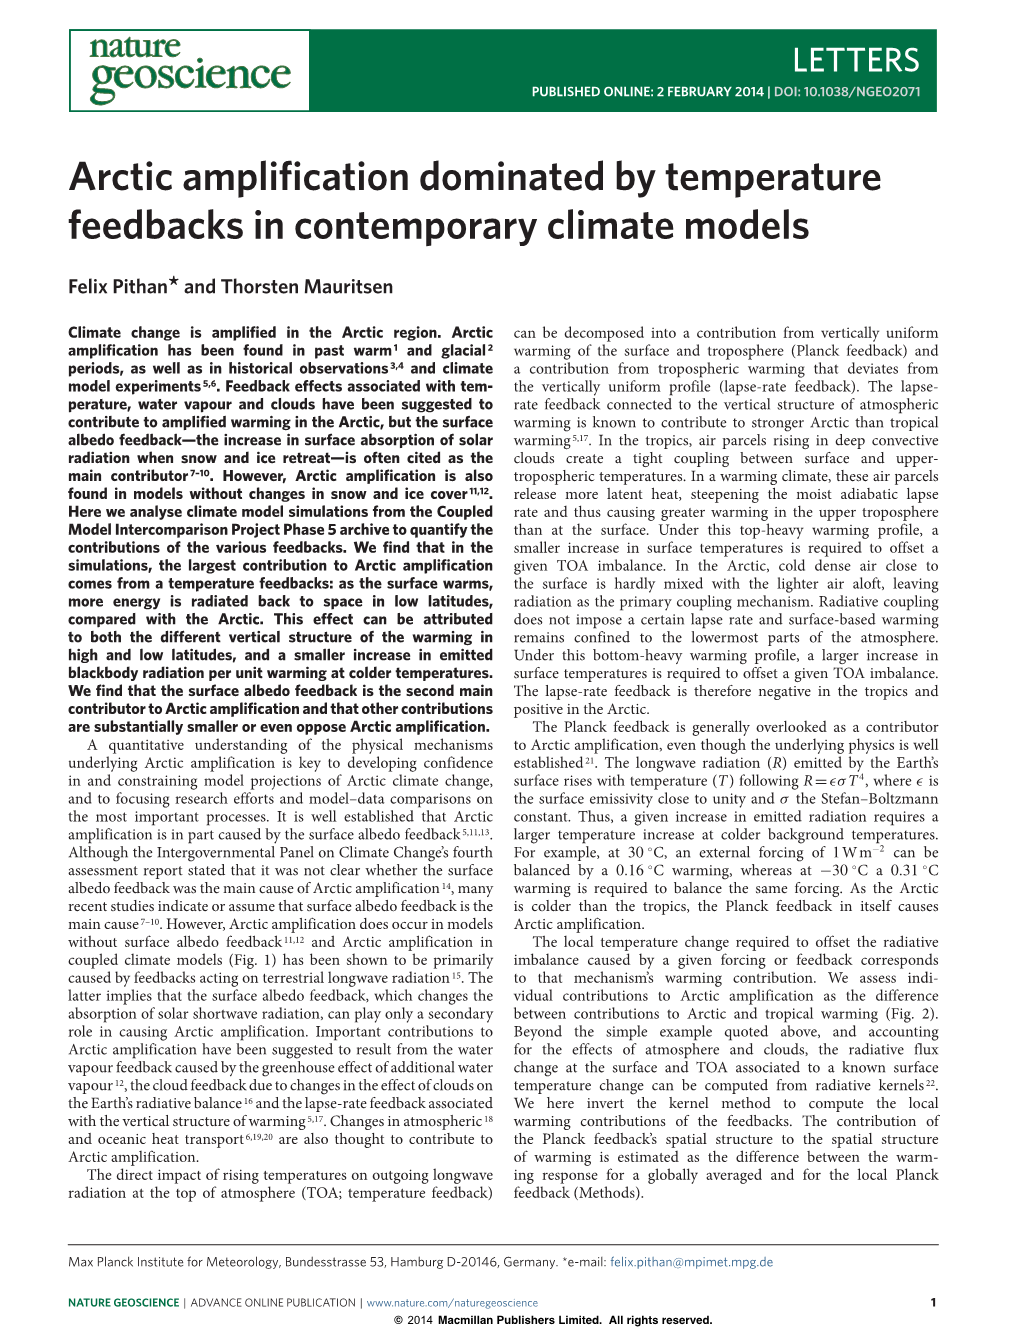 Arctic Amplification Dominated by Temperature Feedbacks in Contemporary Climate Models